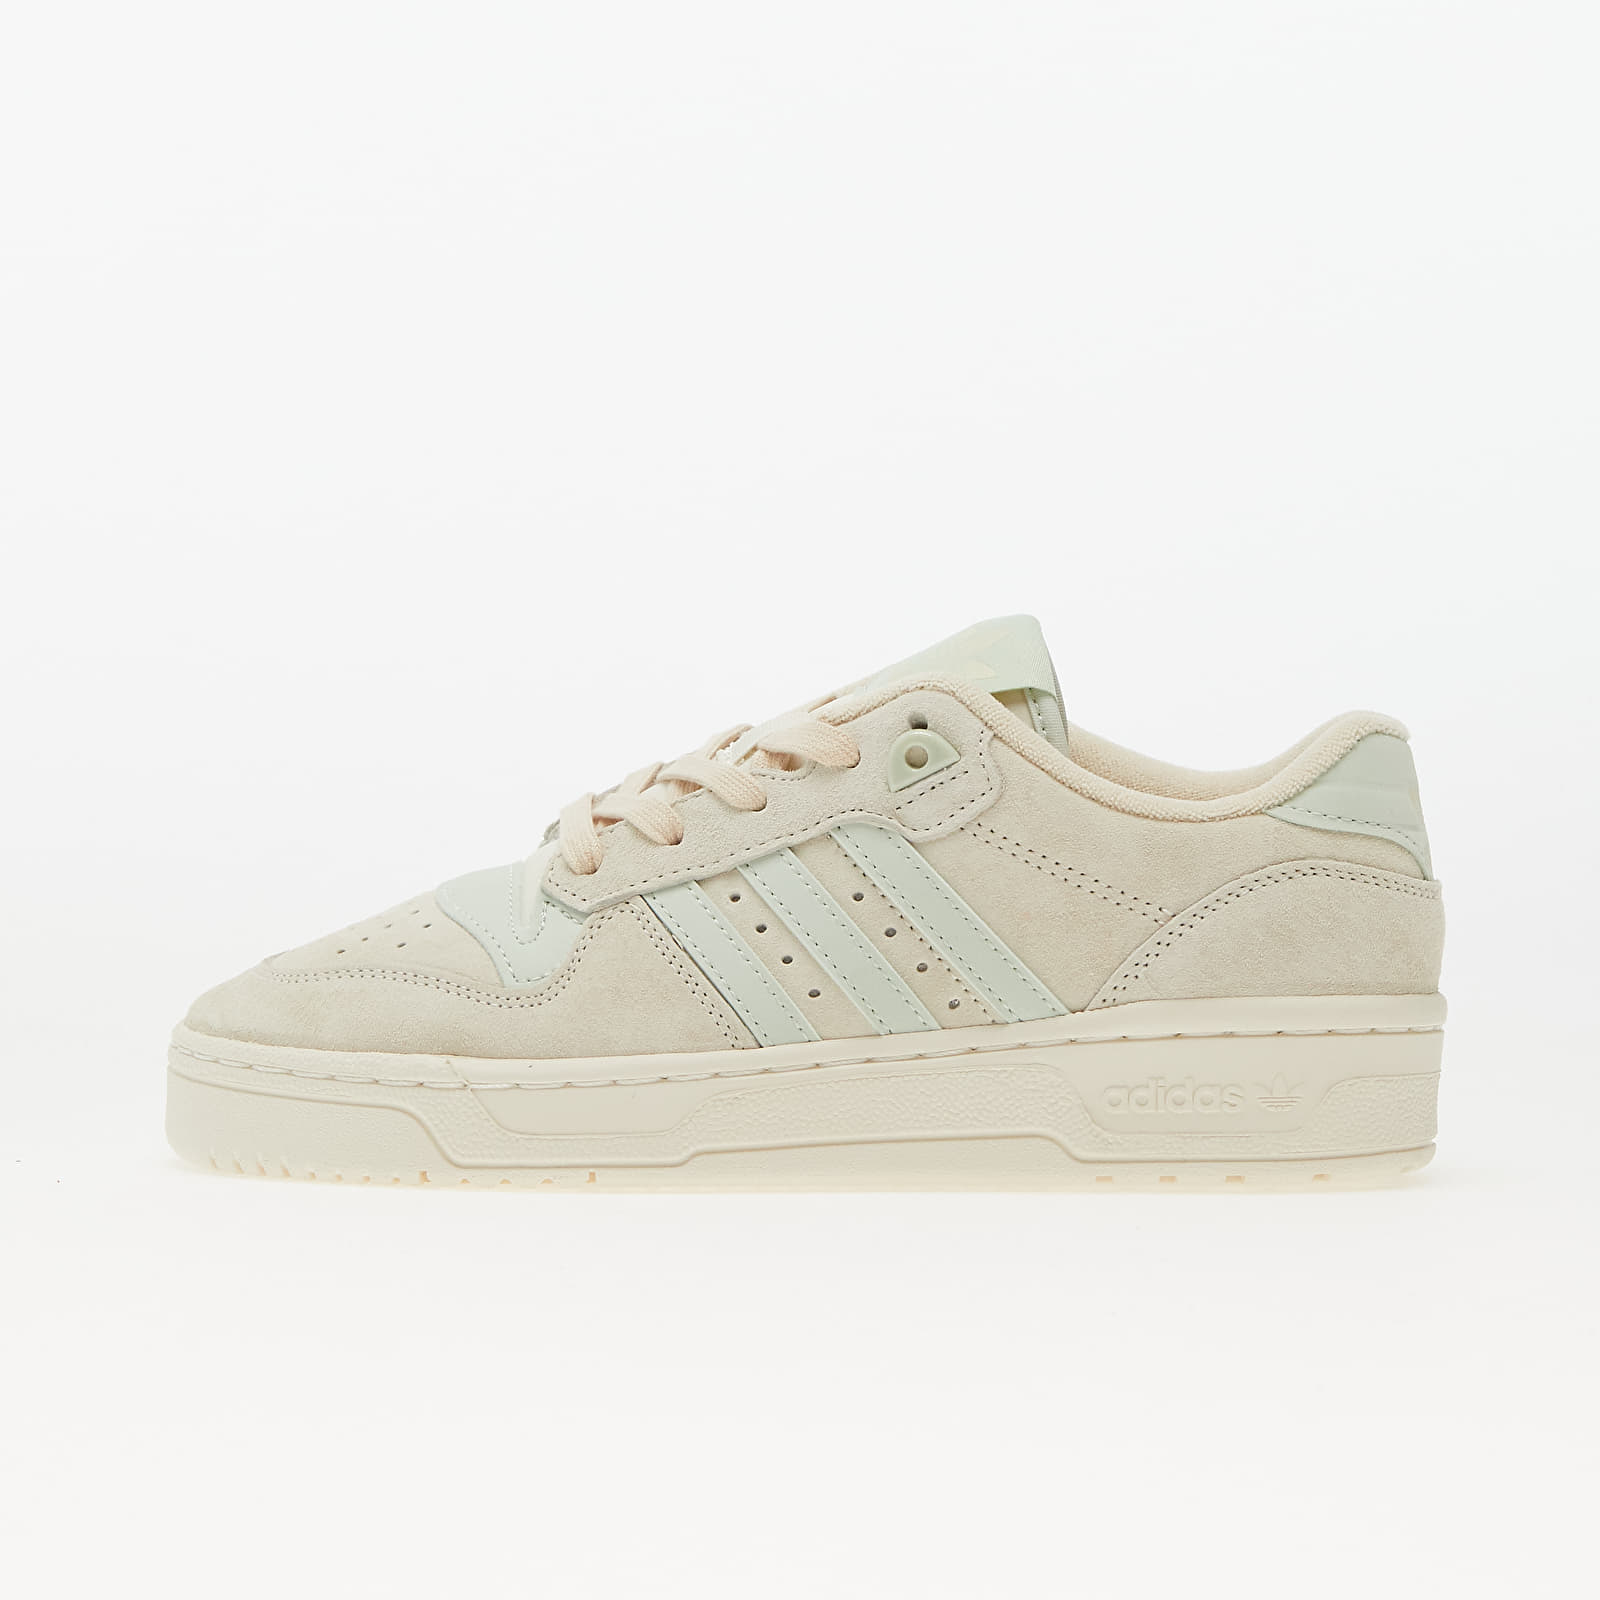 Women's shoes adidas Rivalry Low Cream White